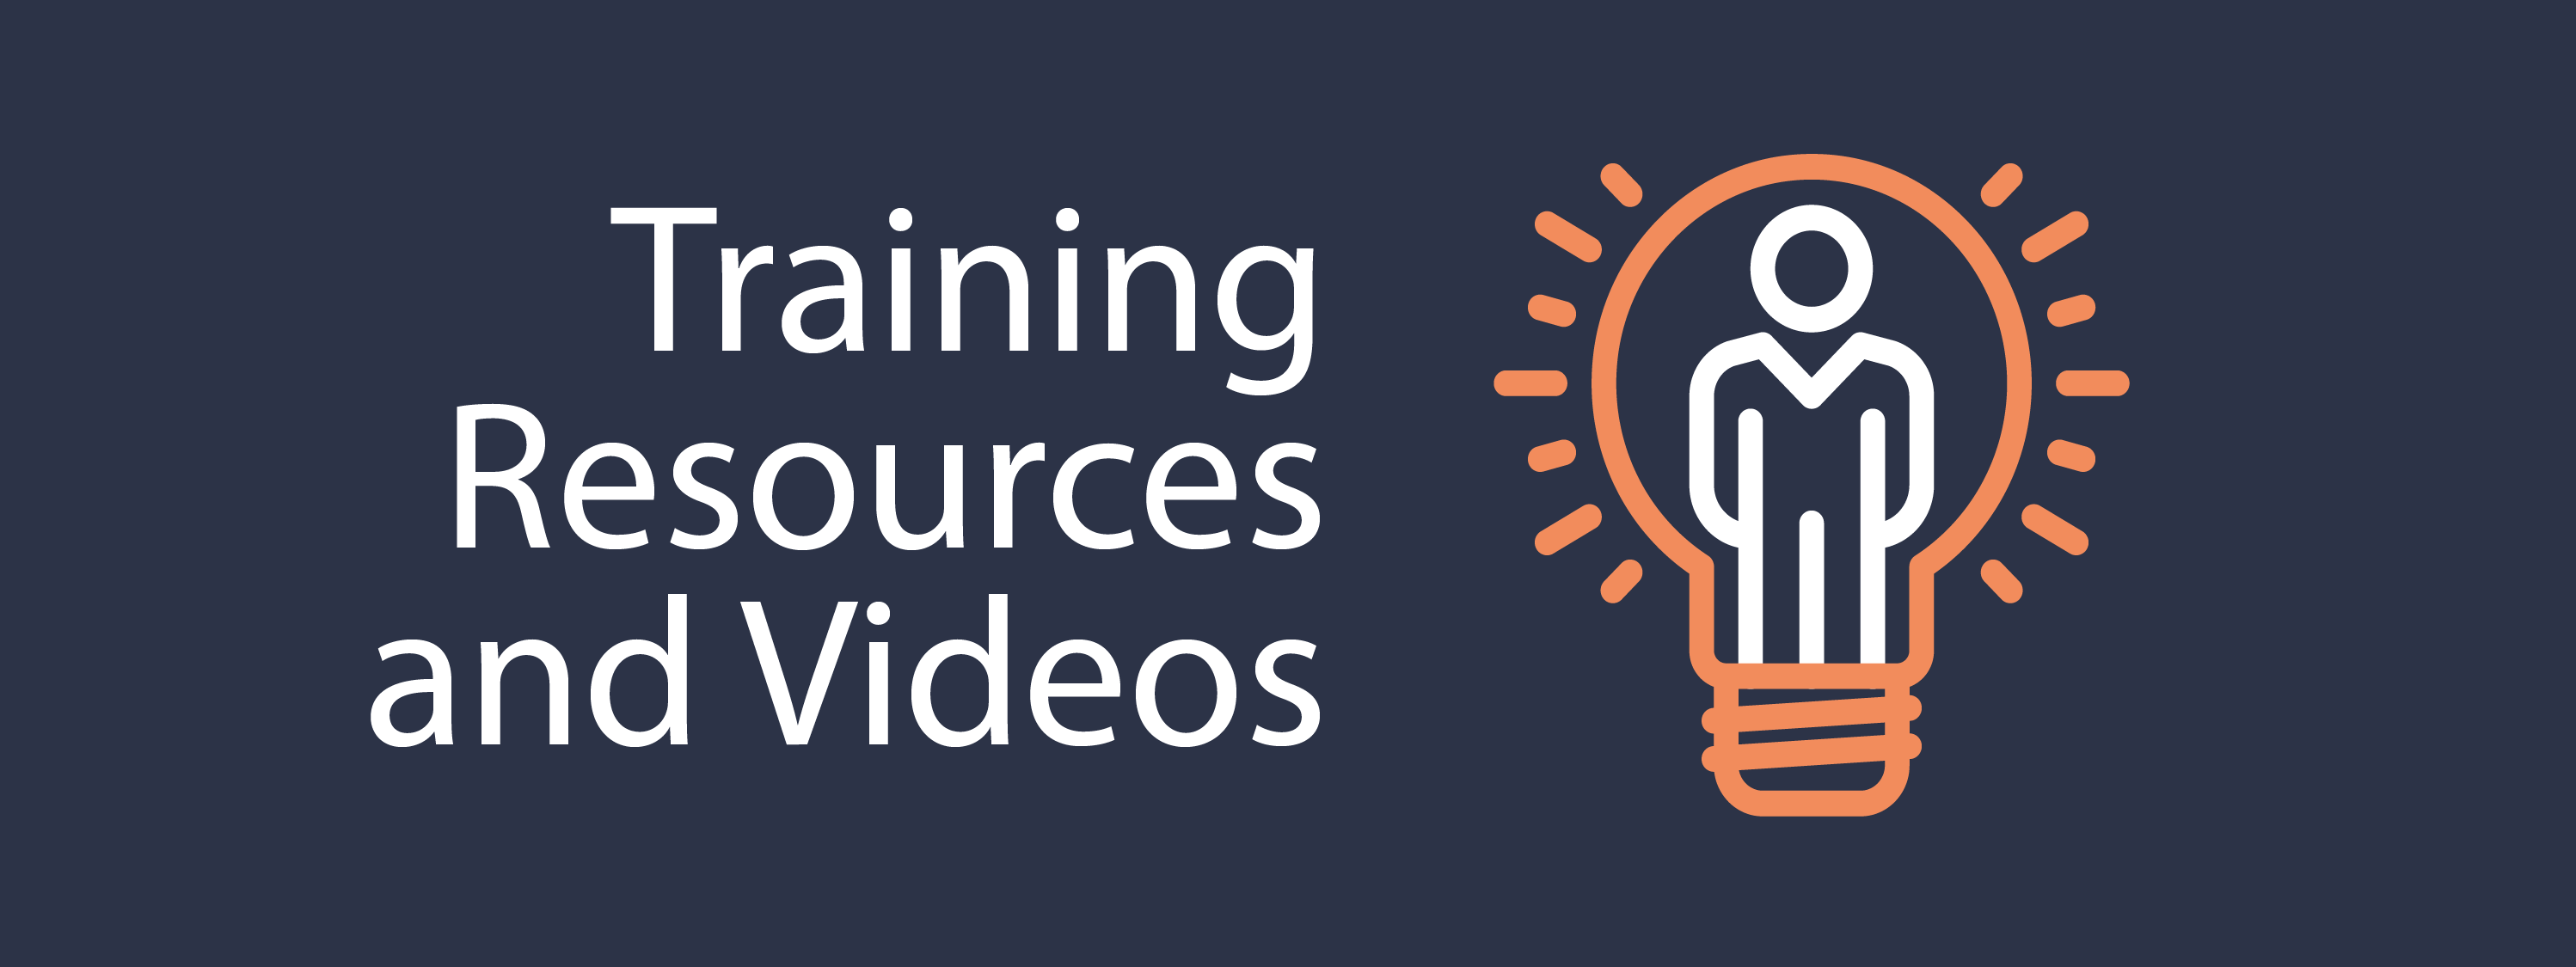 Training Resources and Videos